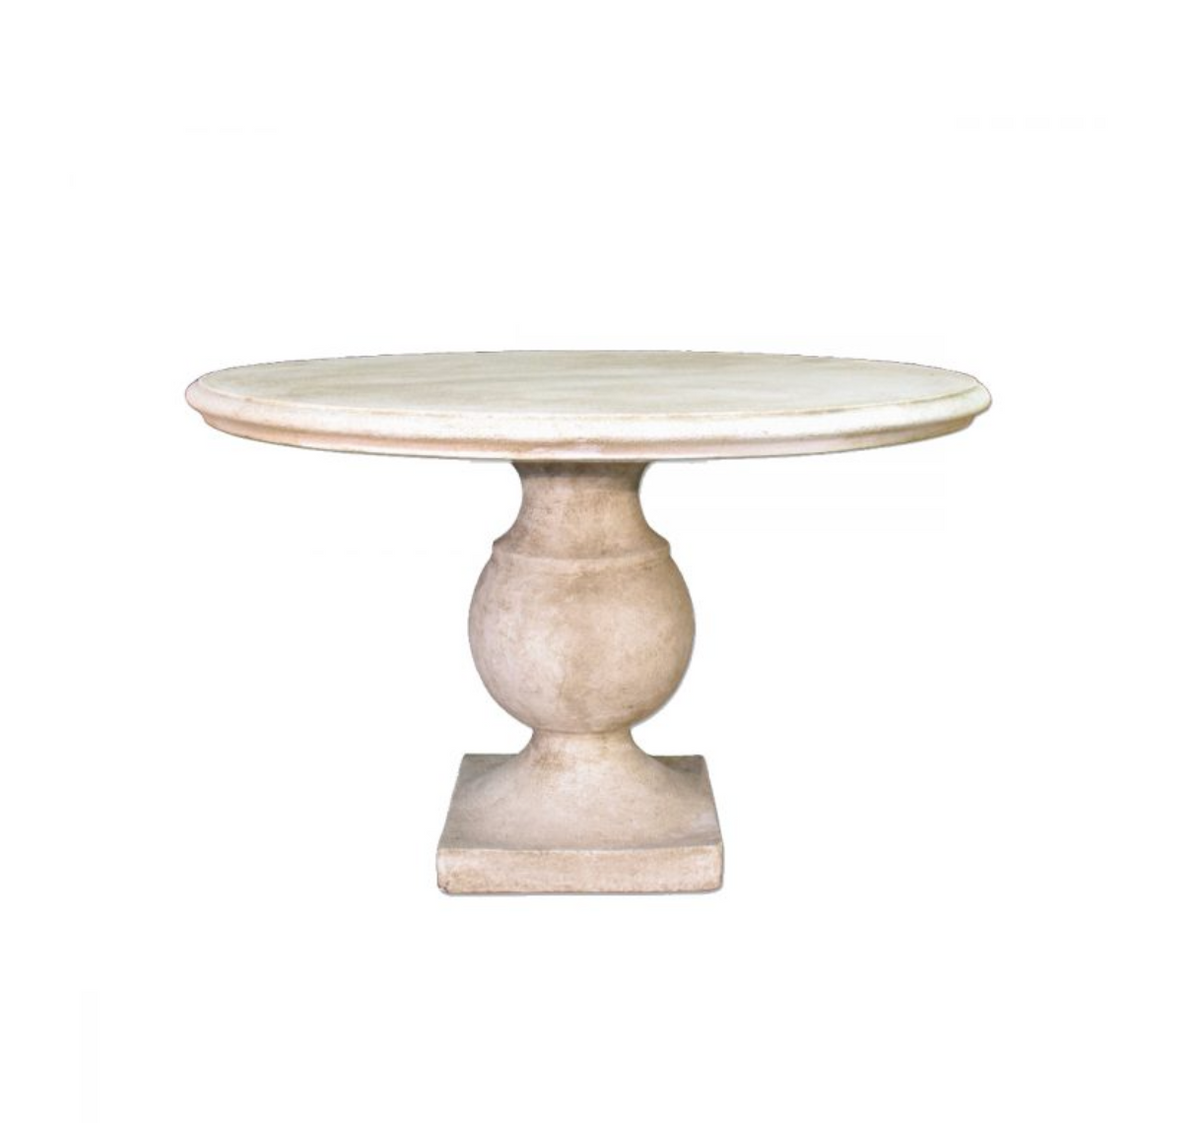 PERFECT ROUND DINING TABLE